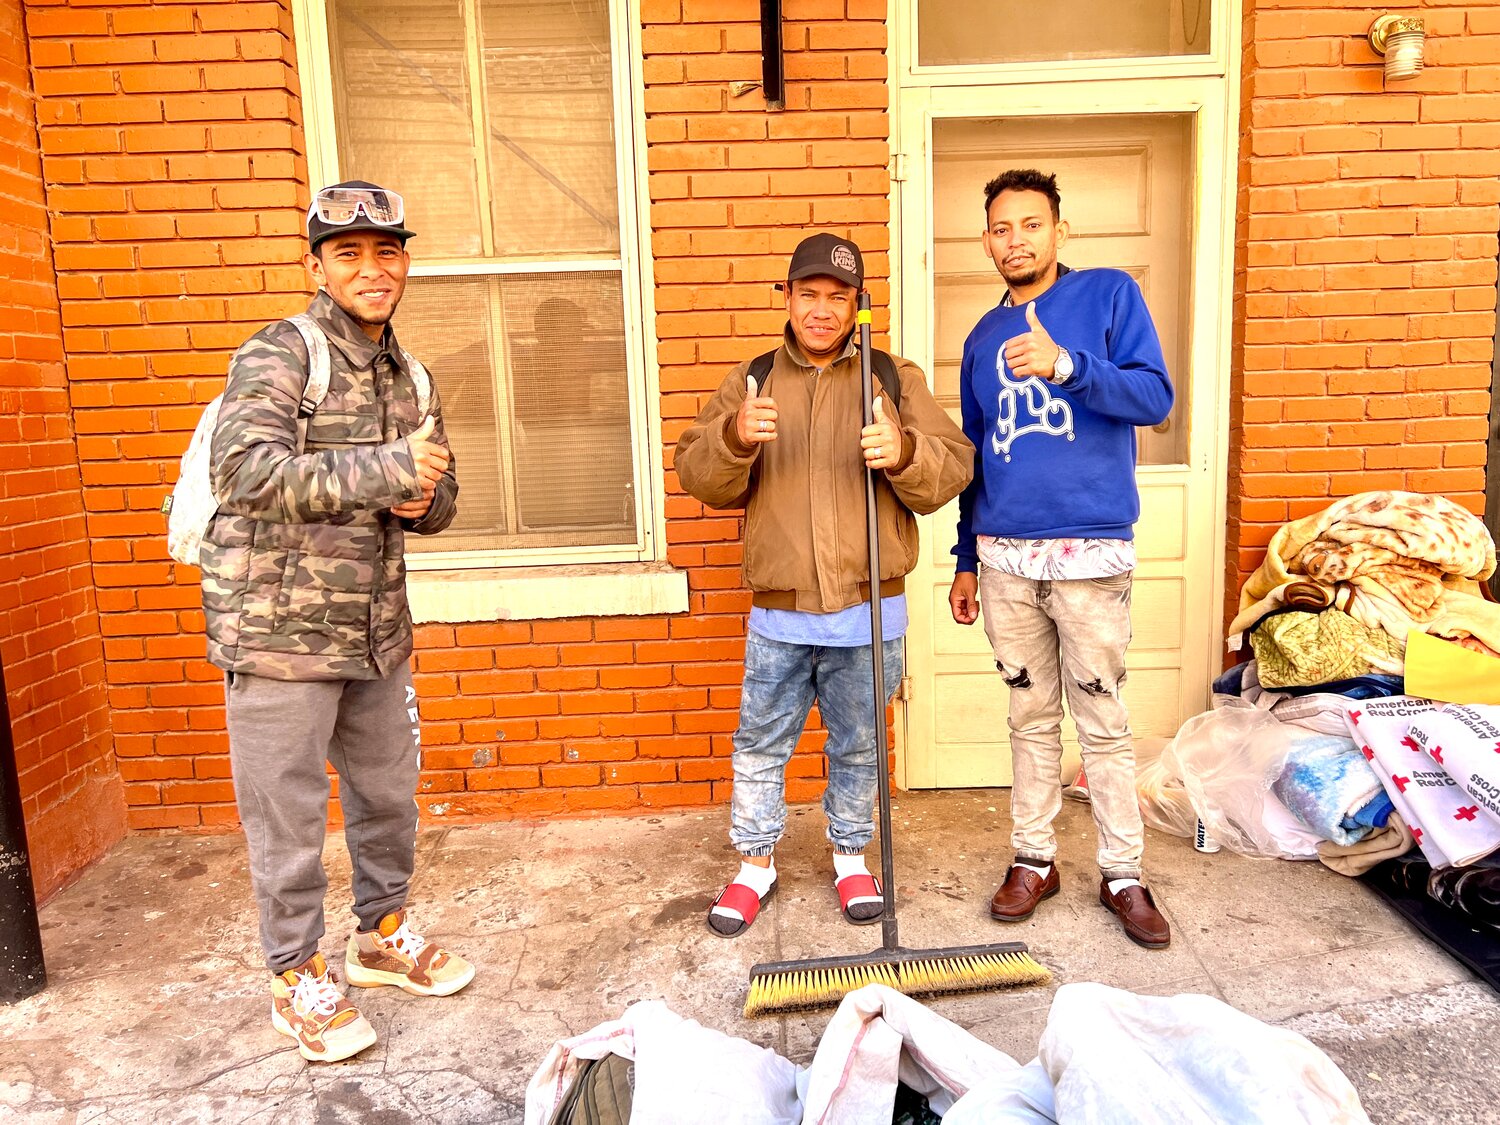 Three Venezuelans worked on cleanup at Sacred Heart church in El Paso, where some migrants stay